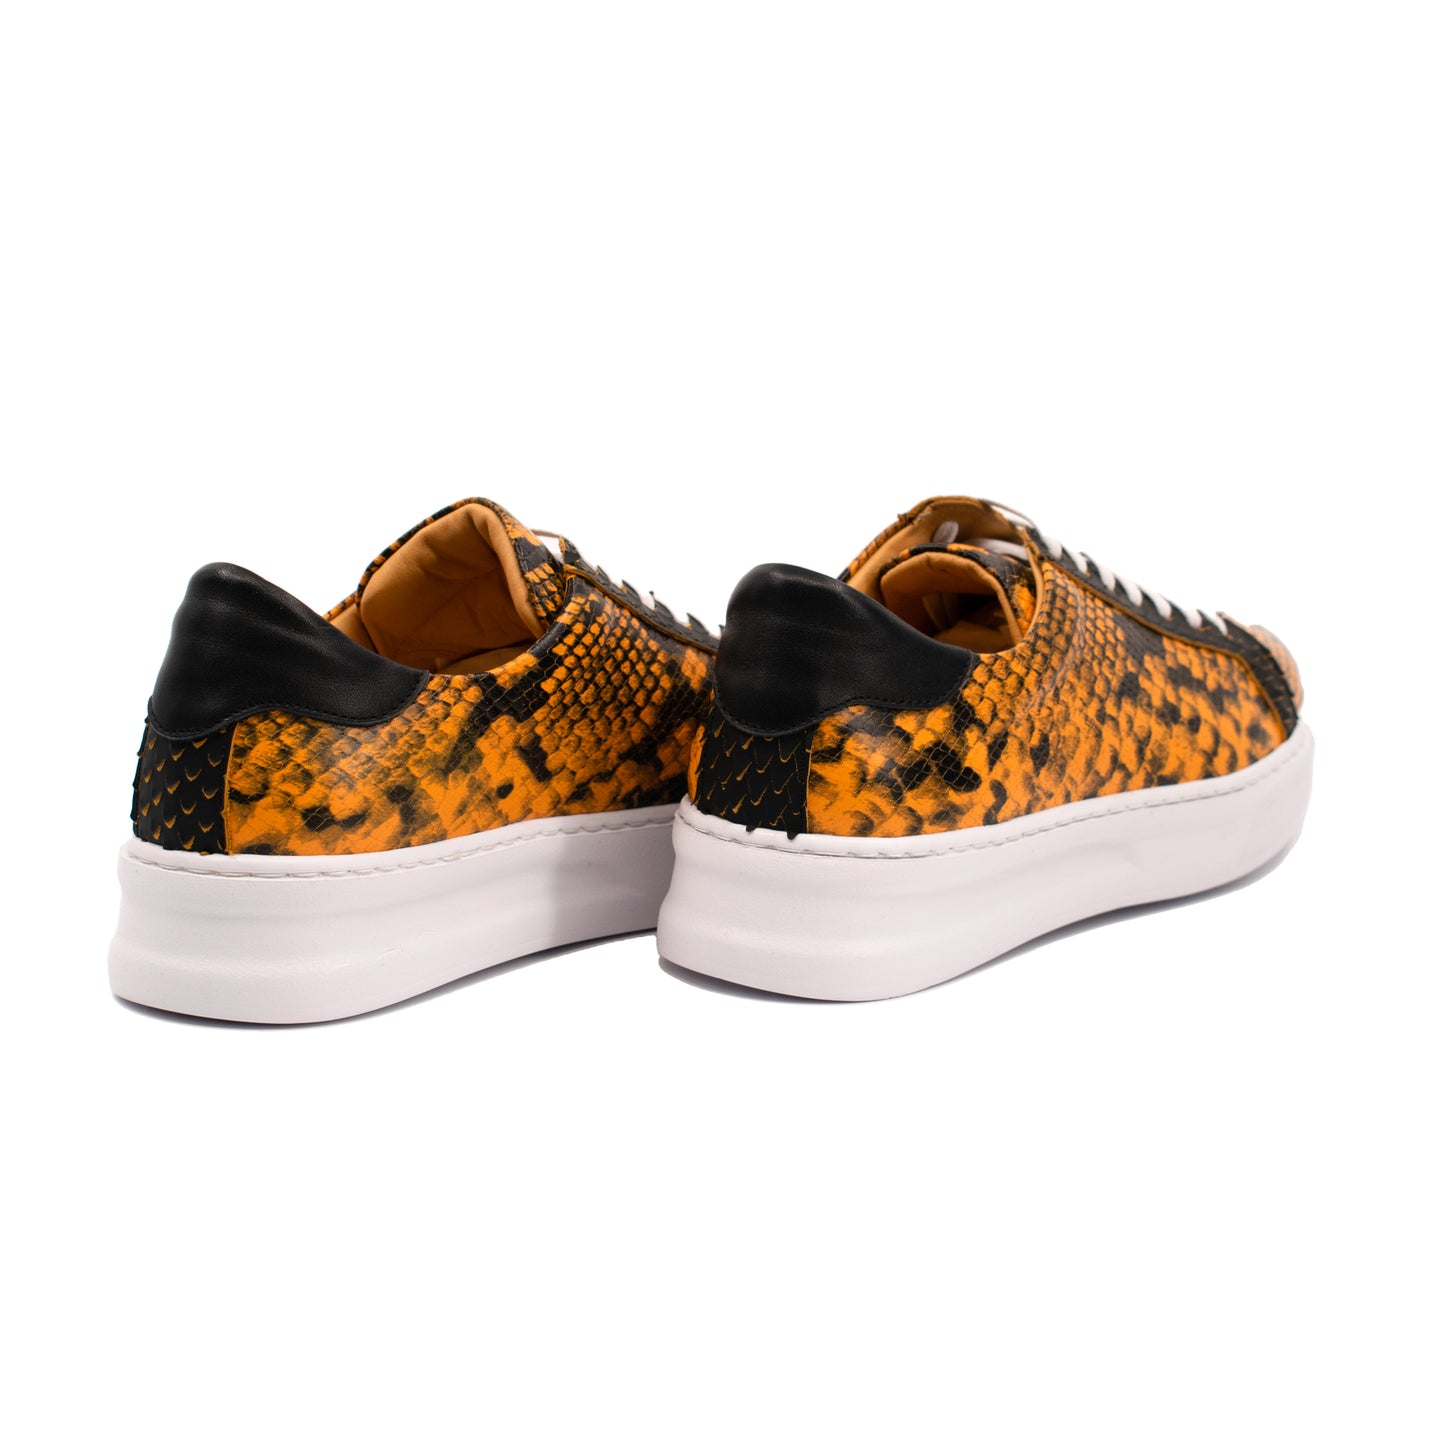 HCANSS SNAKE YELLOW LEATHER SNEAKER